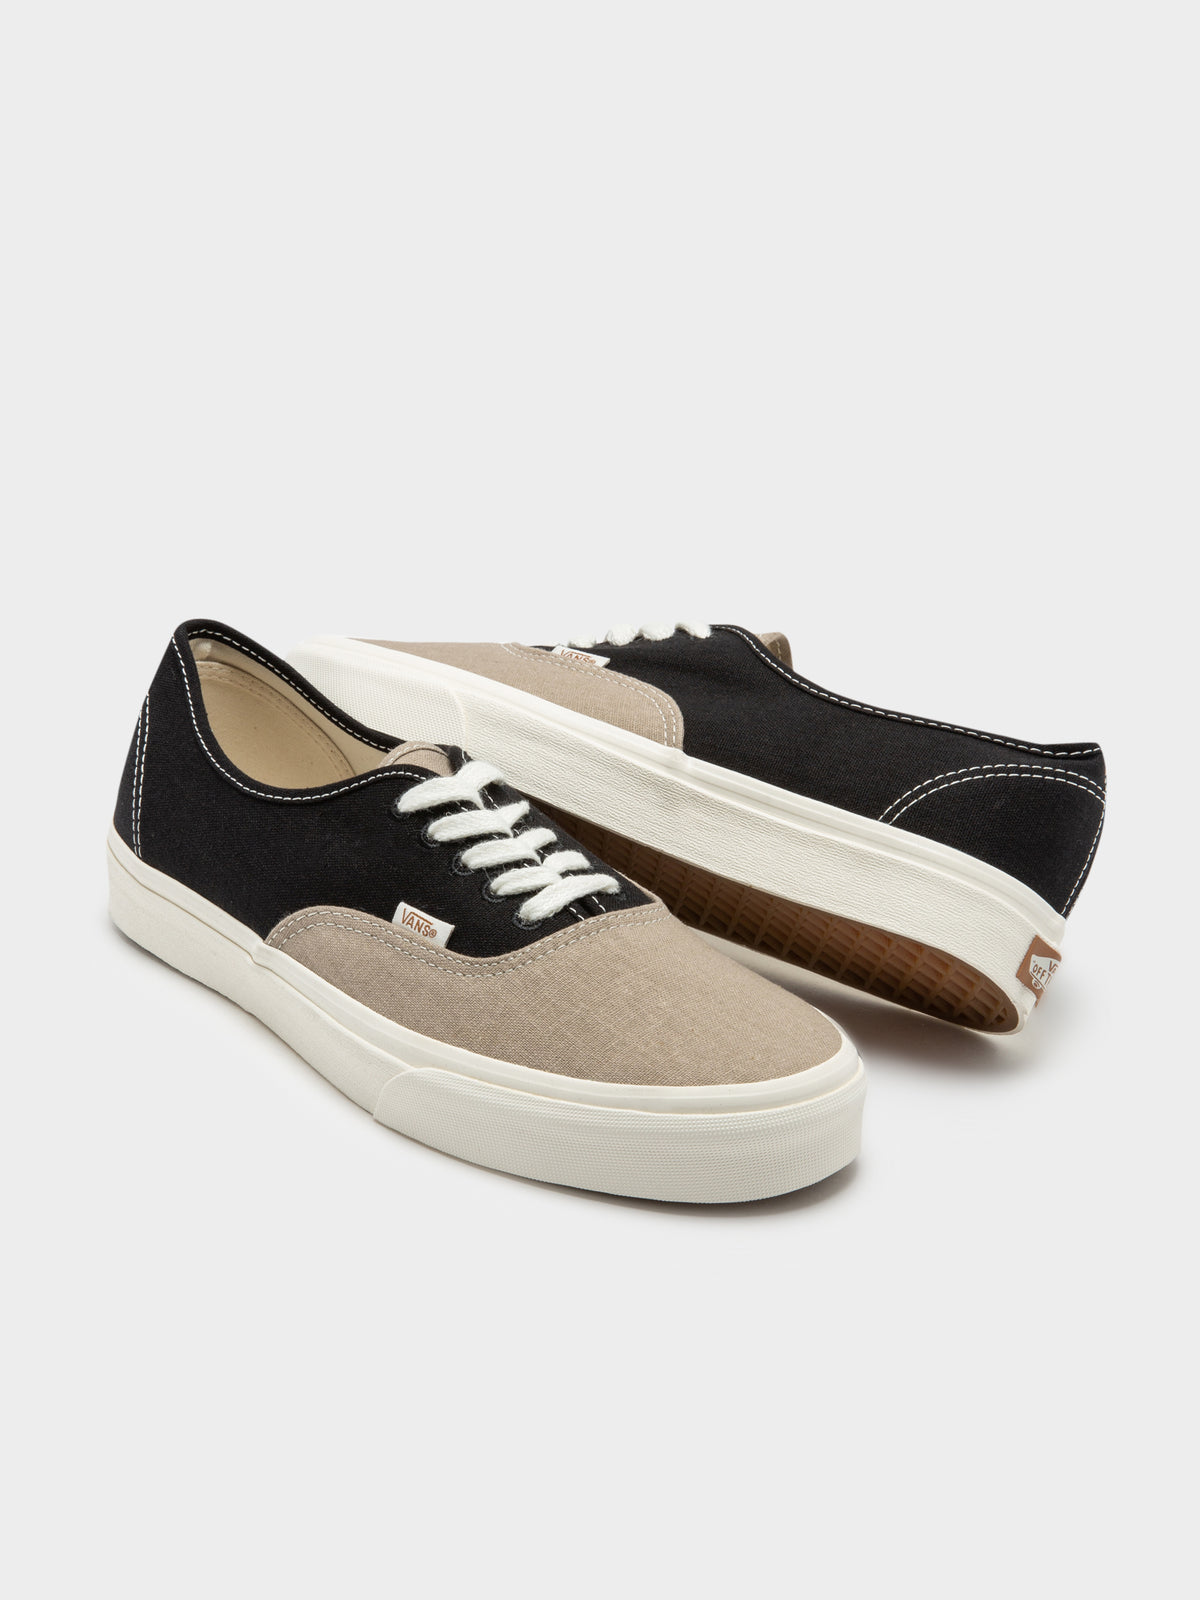 Unisex Authentic Eco Theory Sneakers in Black &amp; Beige